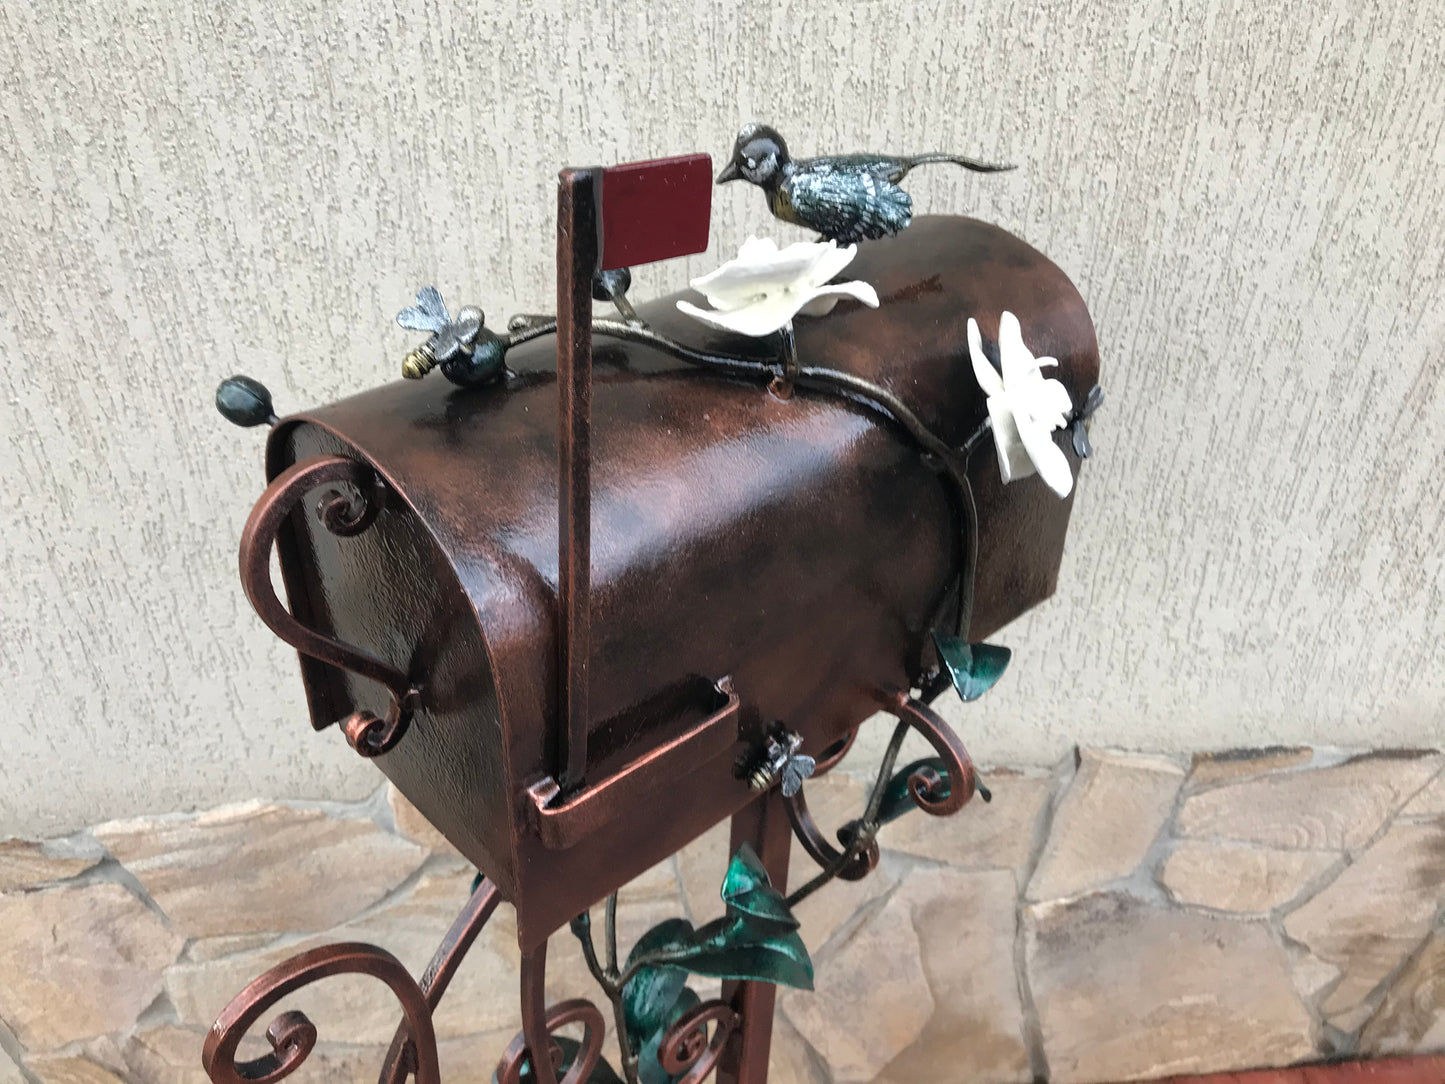 Mail box, mailbox, orchid, bee, bird, hand forged mailbox, floral decor, fairy garden, wedding gift, mail box post, post box, gift for mom